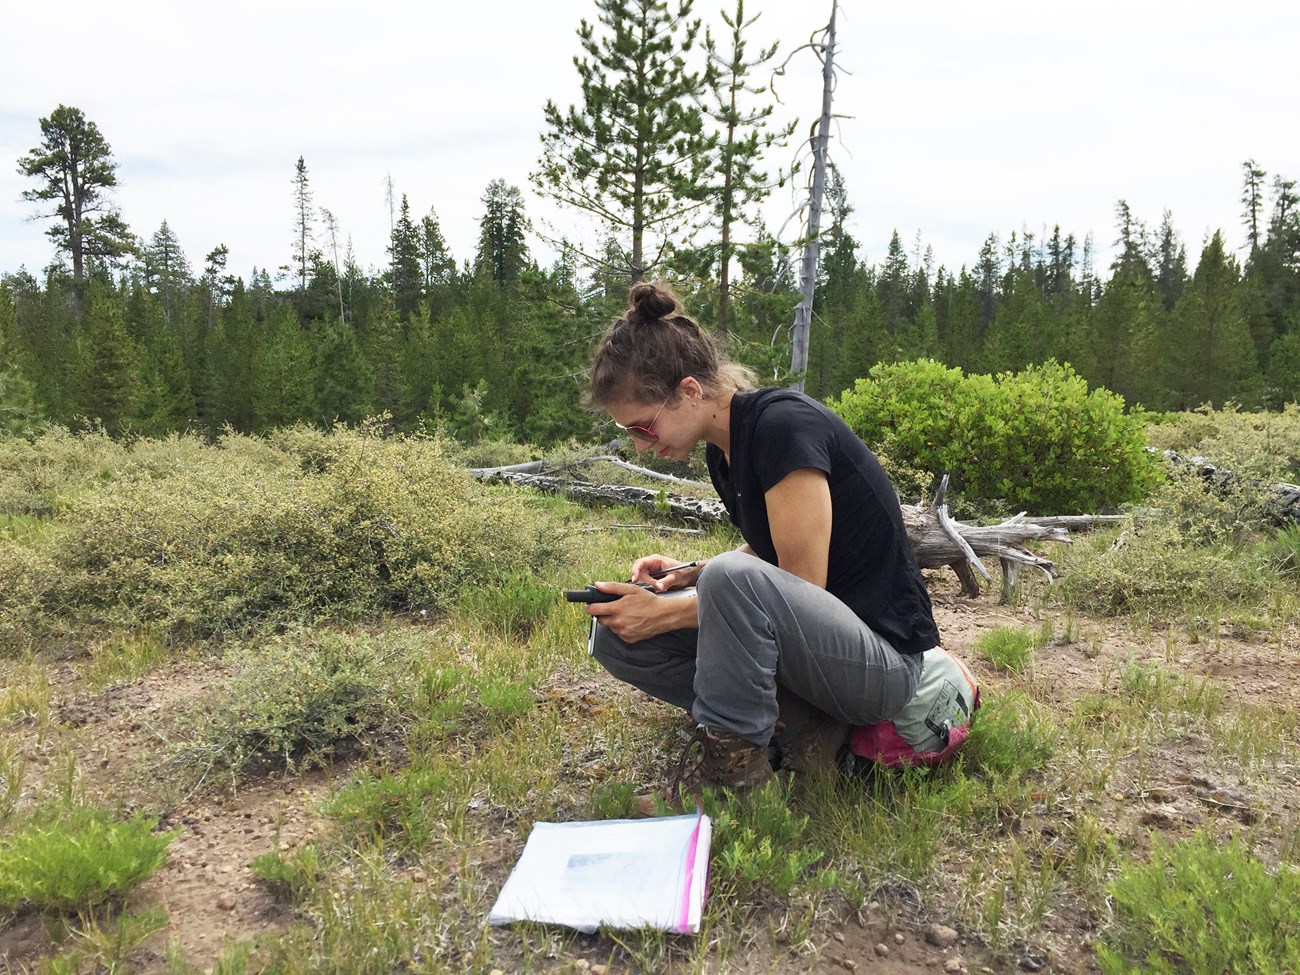 Person crouching in an area of low vegetation, looking at a handheld GPS unit and recording data.